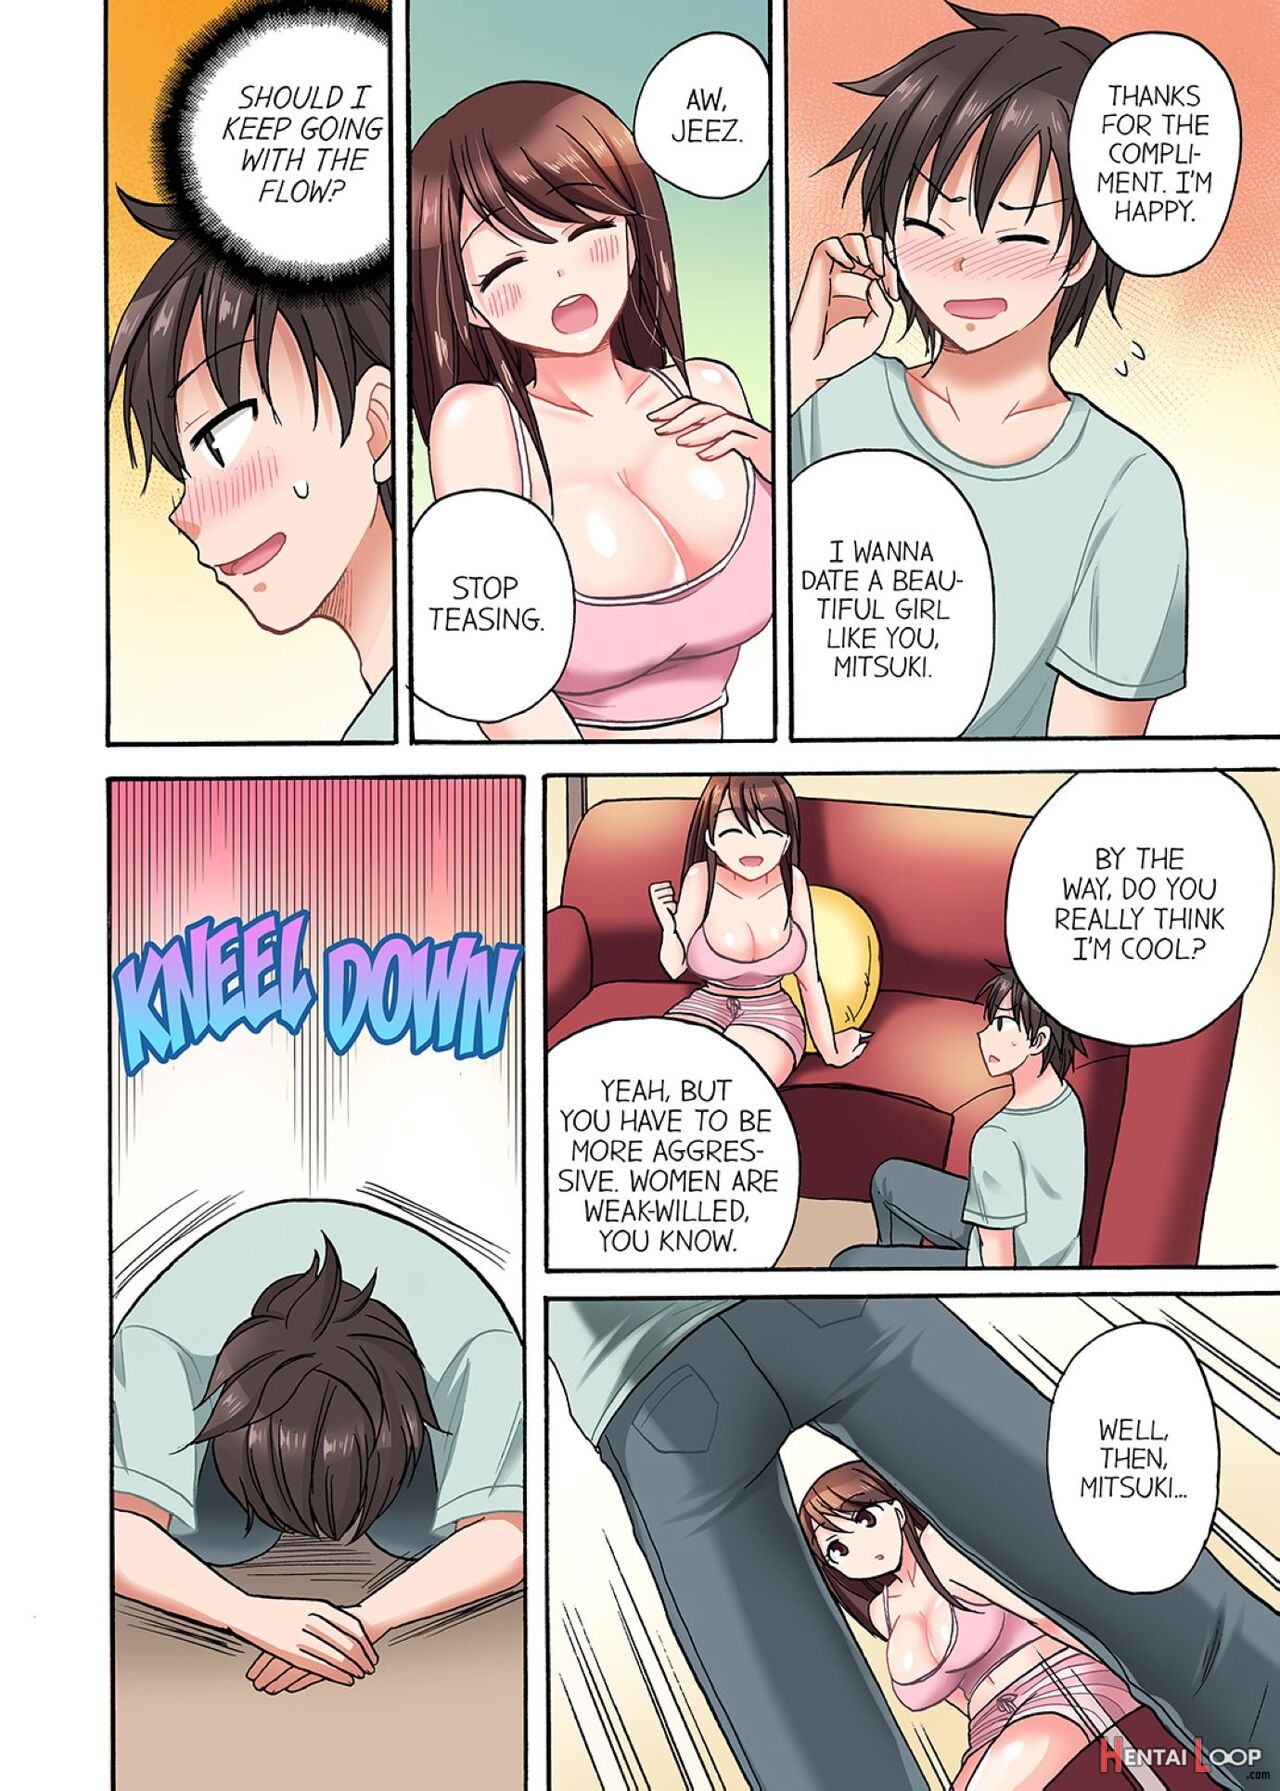 Read You Said Just The Tip… I Asked My Brothers Girlfriend To Have Sex With Me Without A Condom!! (by Kotobuki Maimu) photo